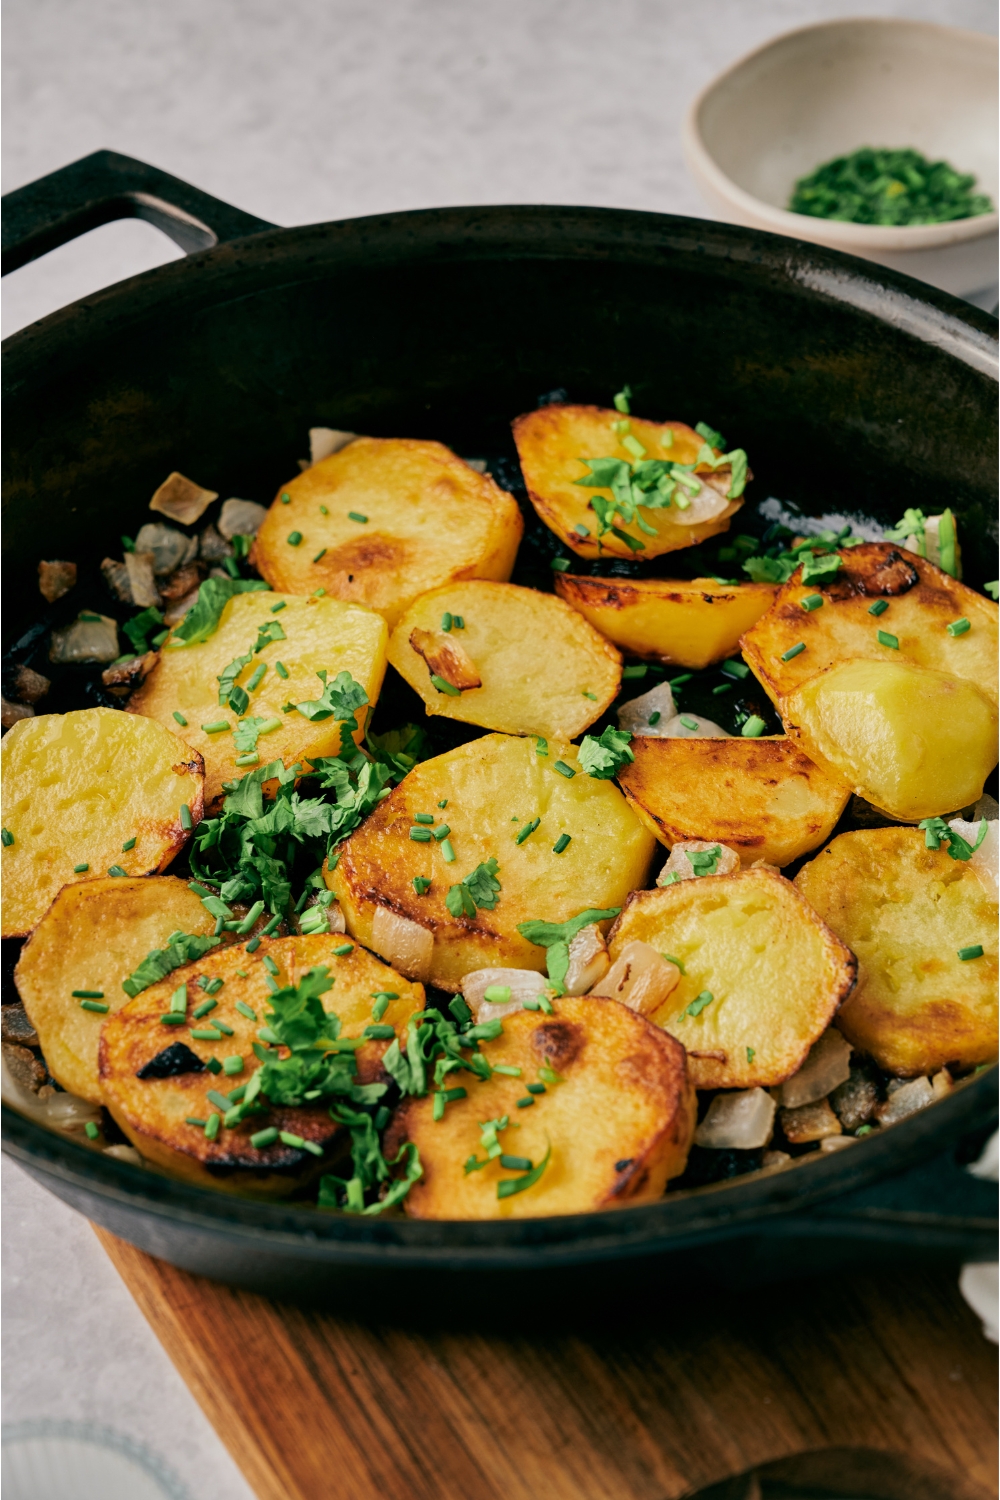 A skillet with pan fried potatoes and onions garnished with fresh green herbs.